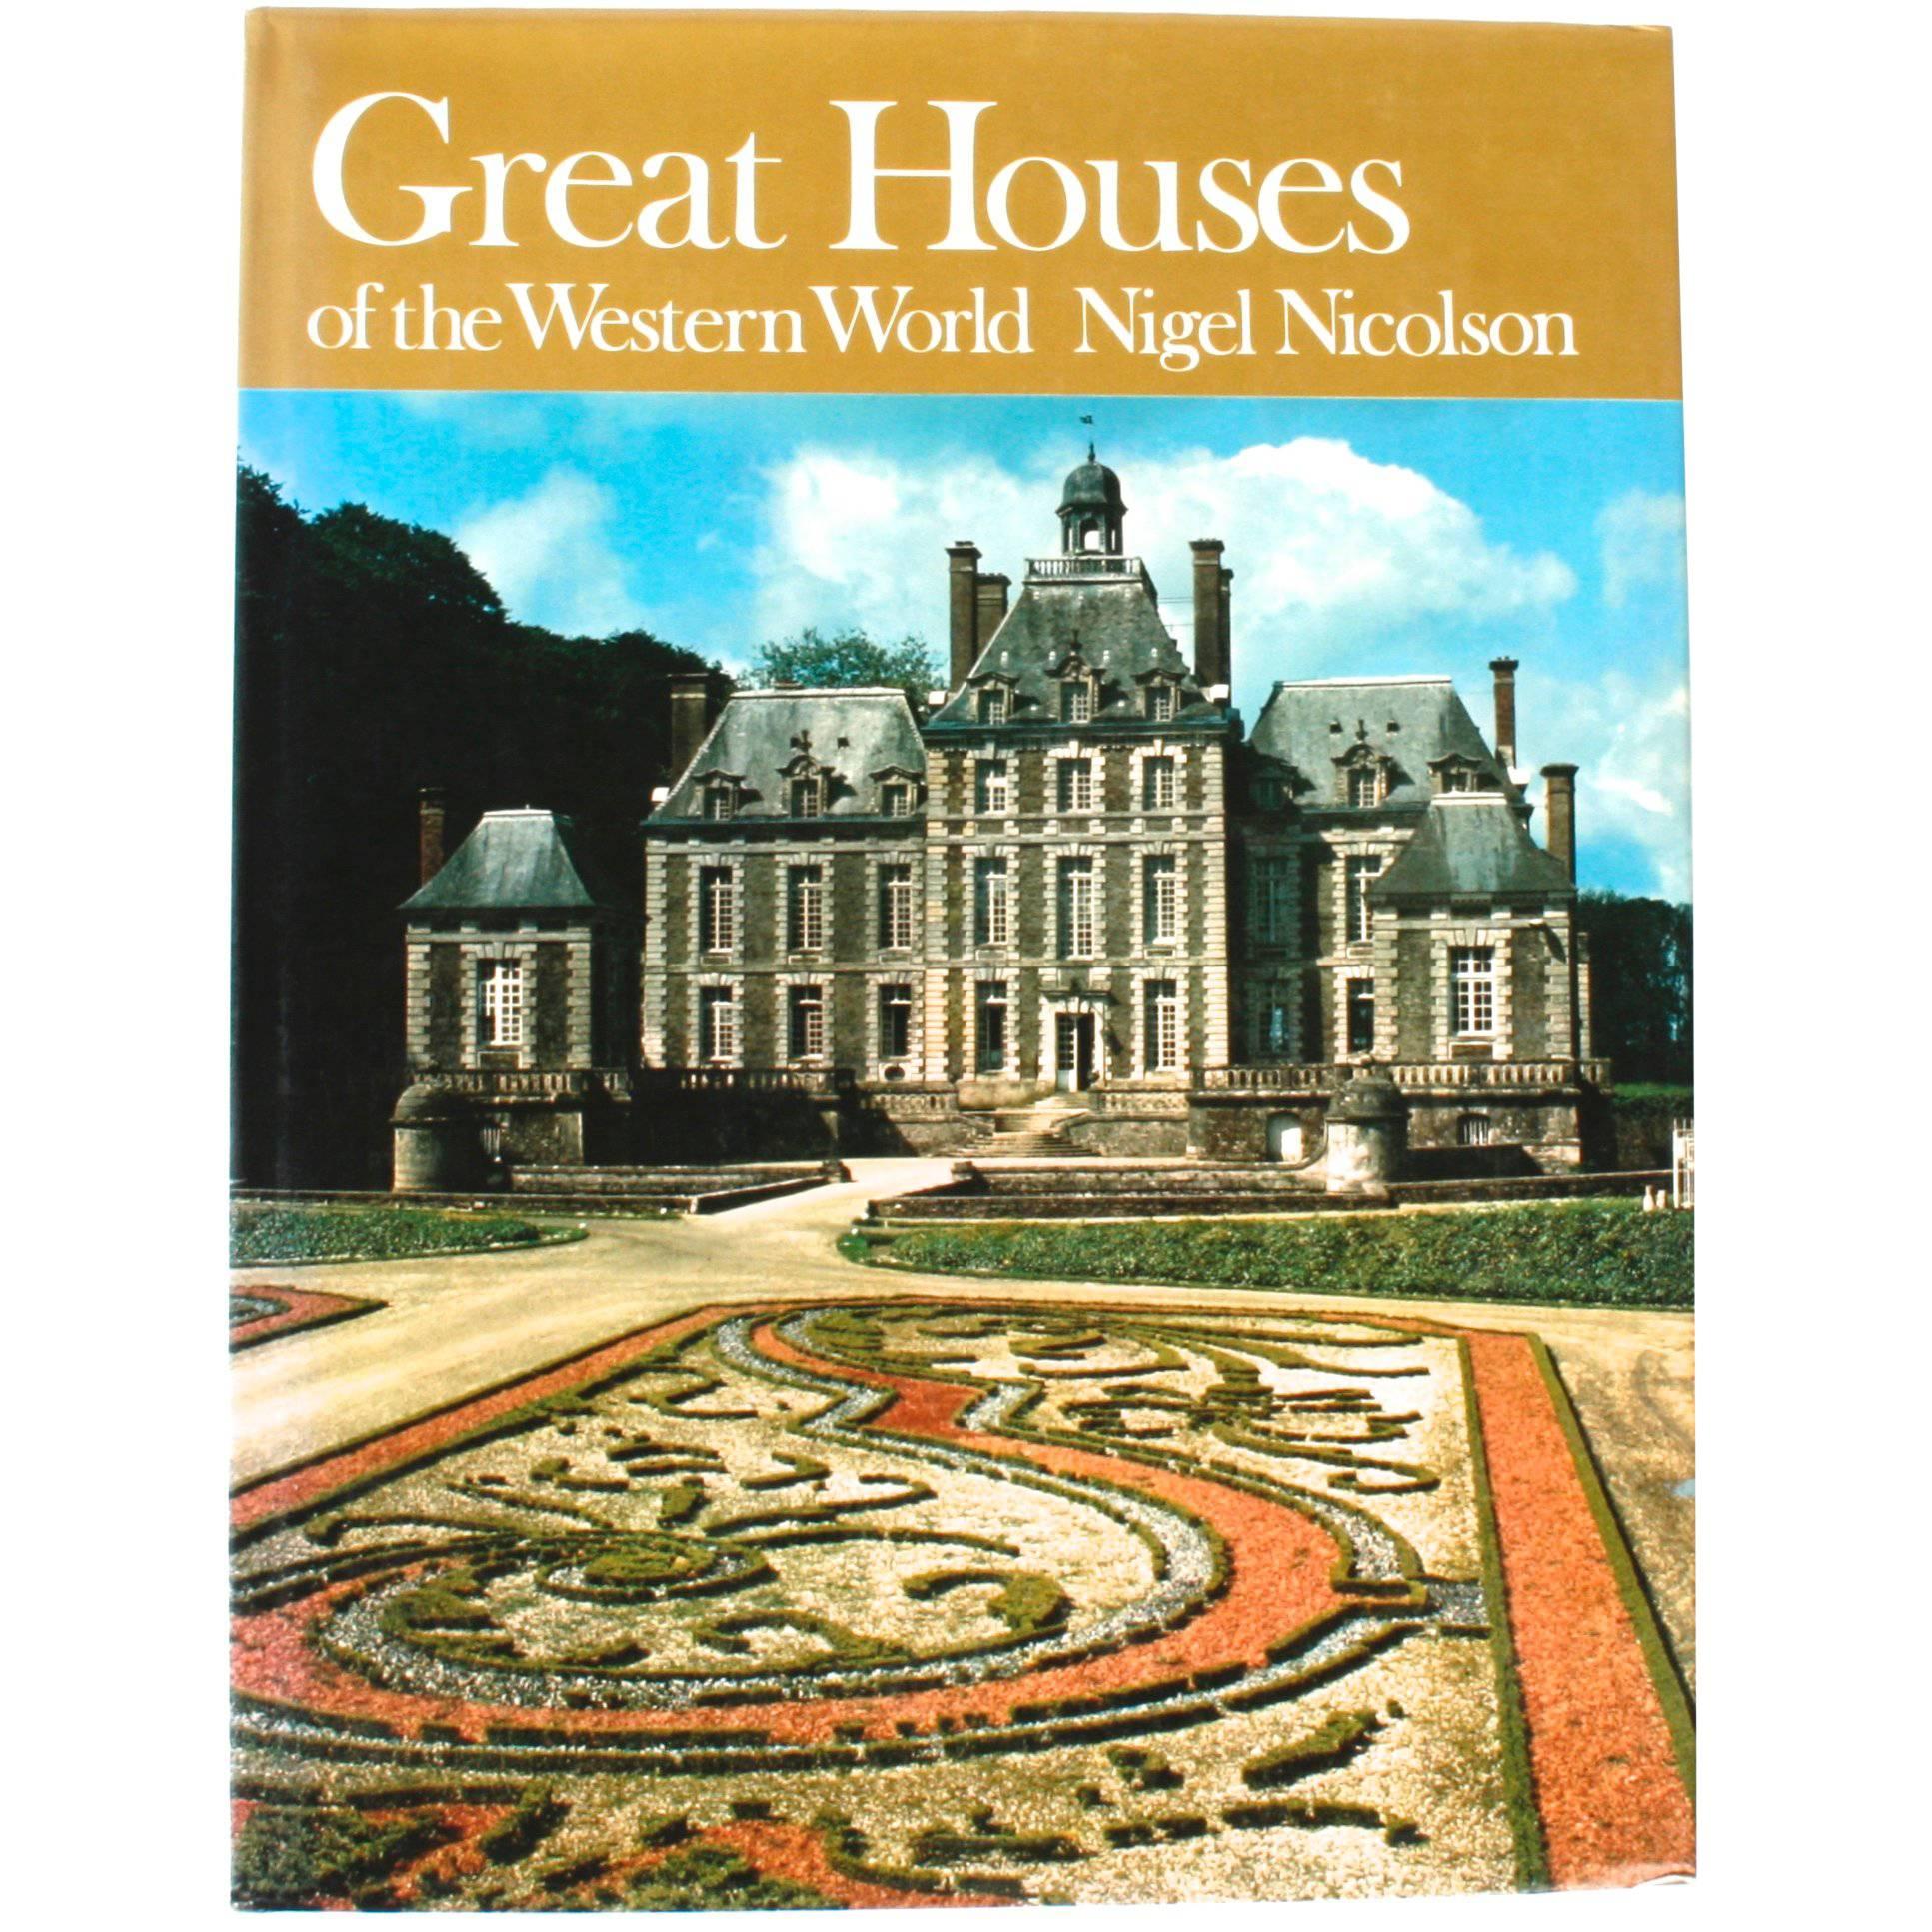 Great Houses of the Western World by Nigel Nicolson For Sale